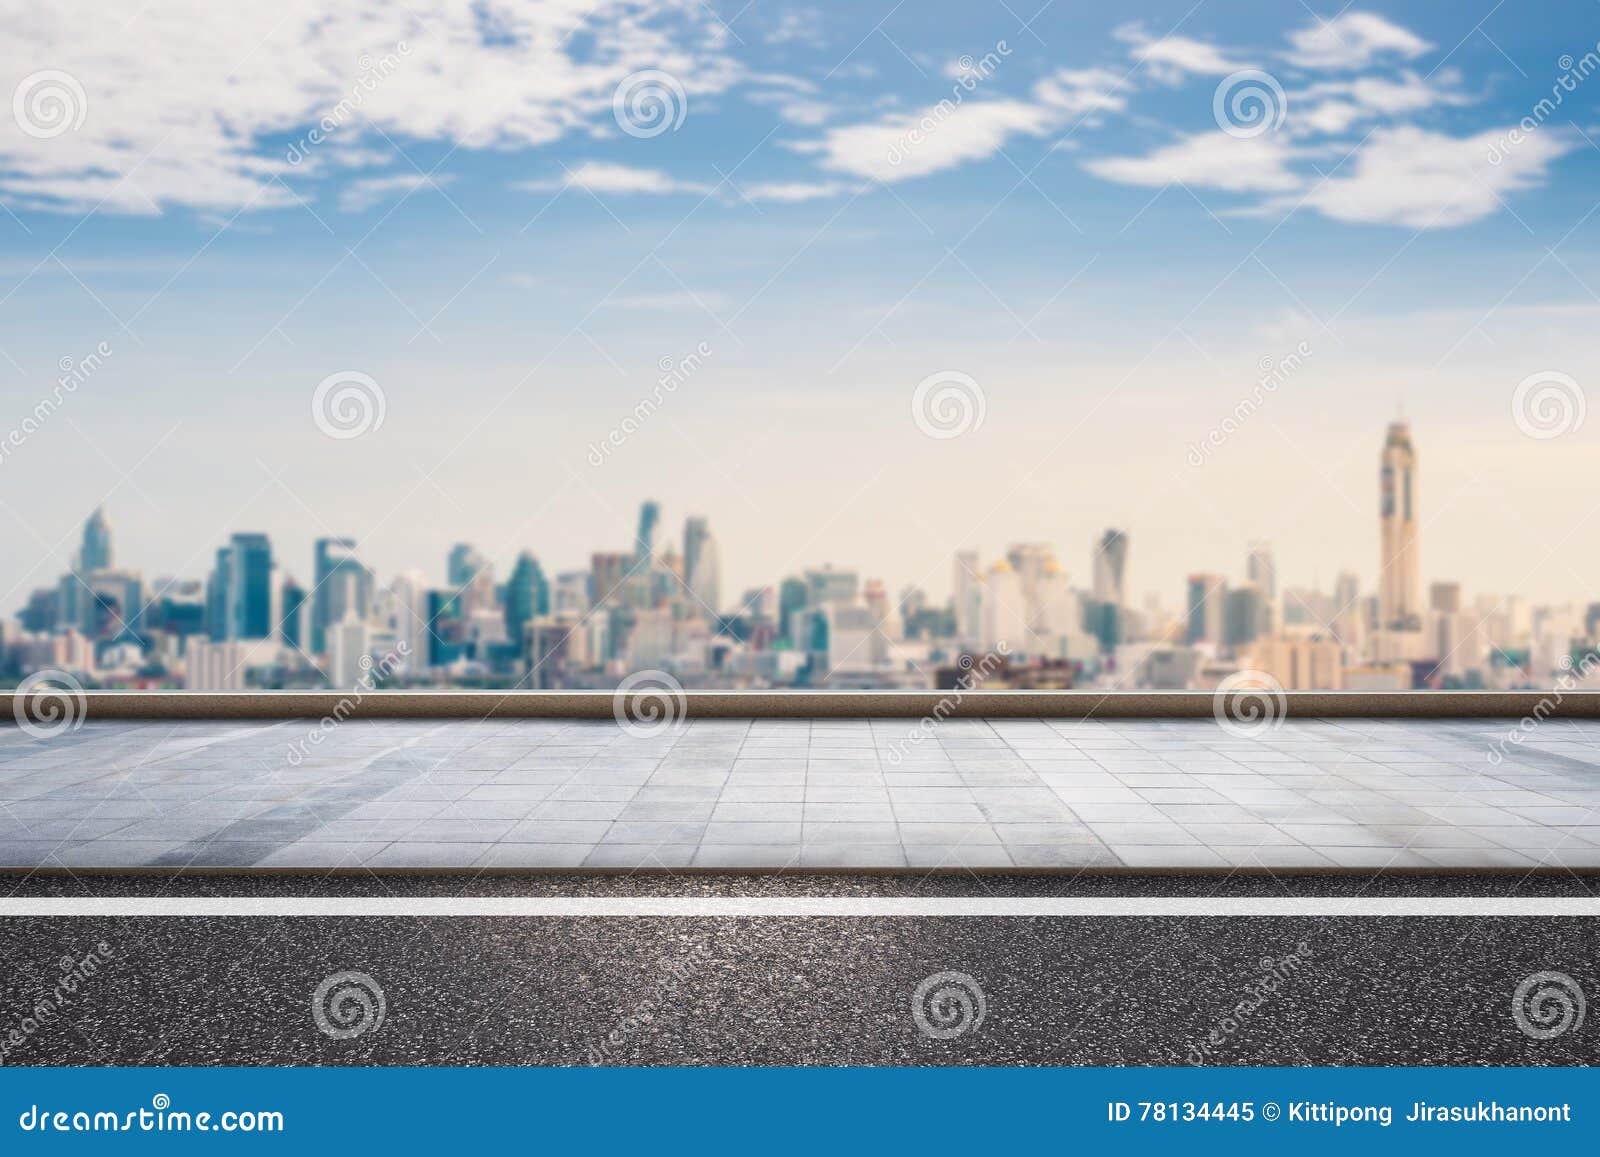 roadside with cityscape background